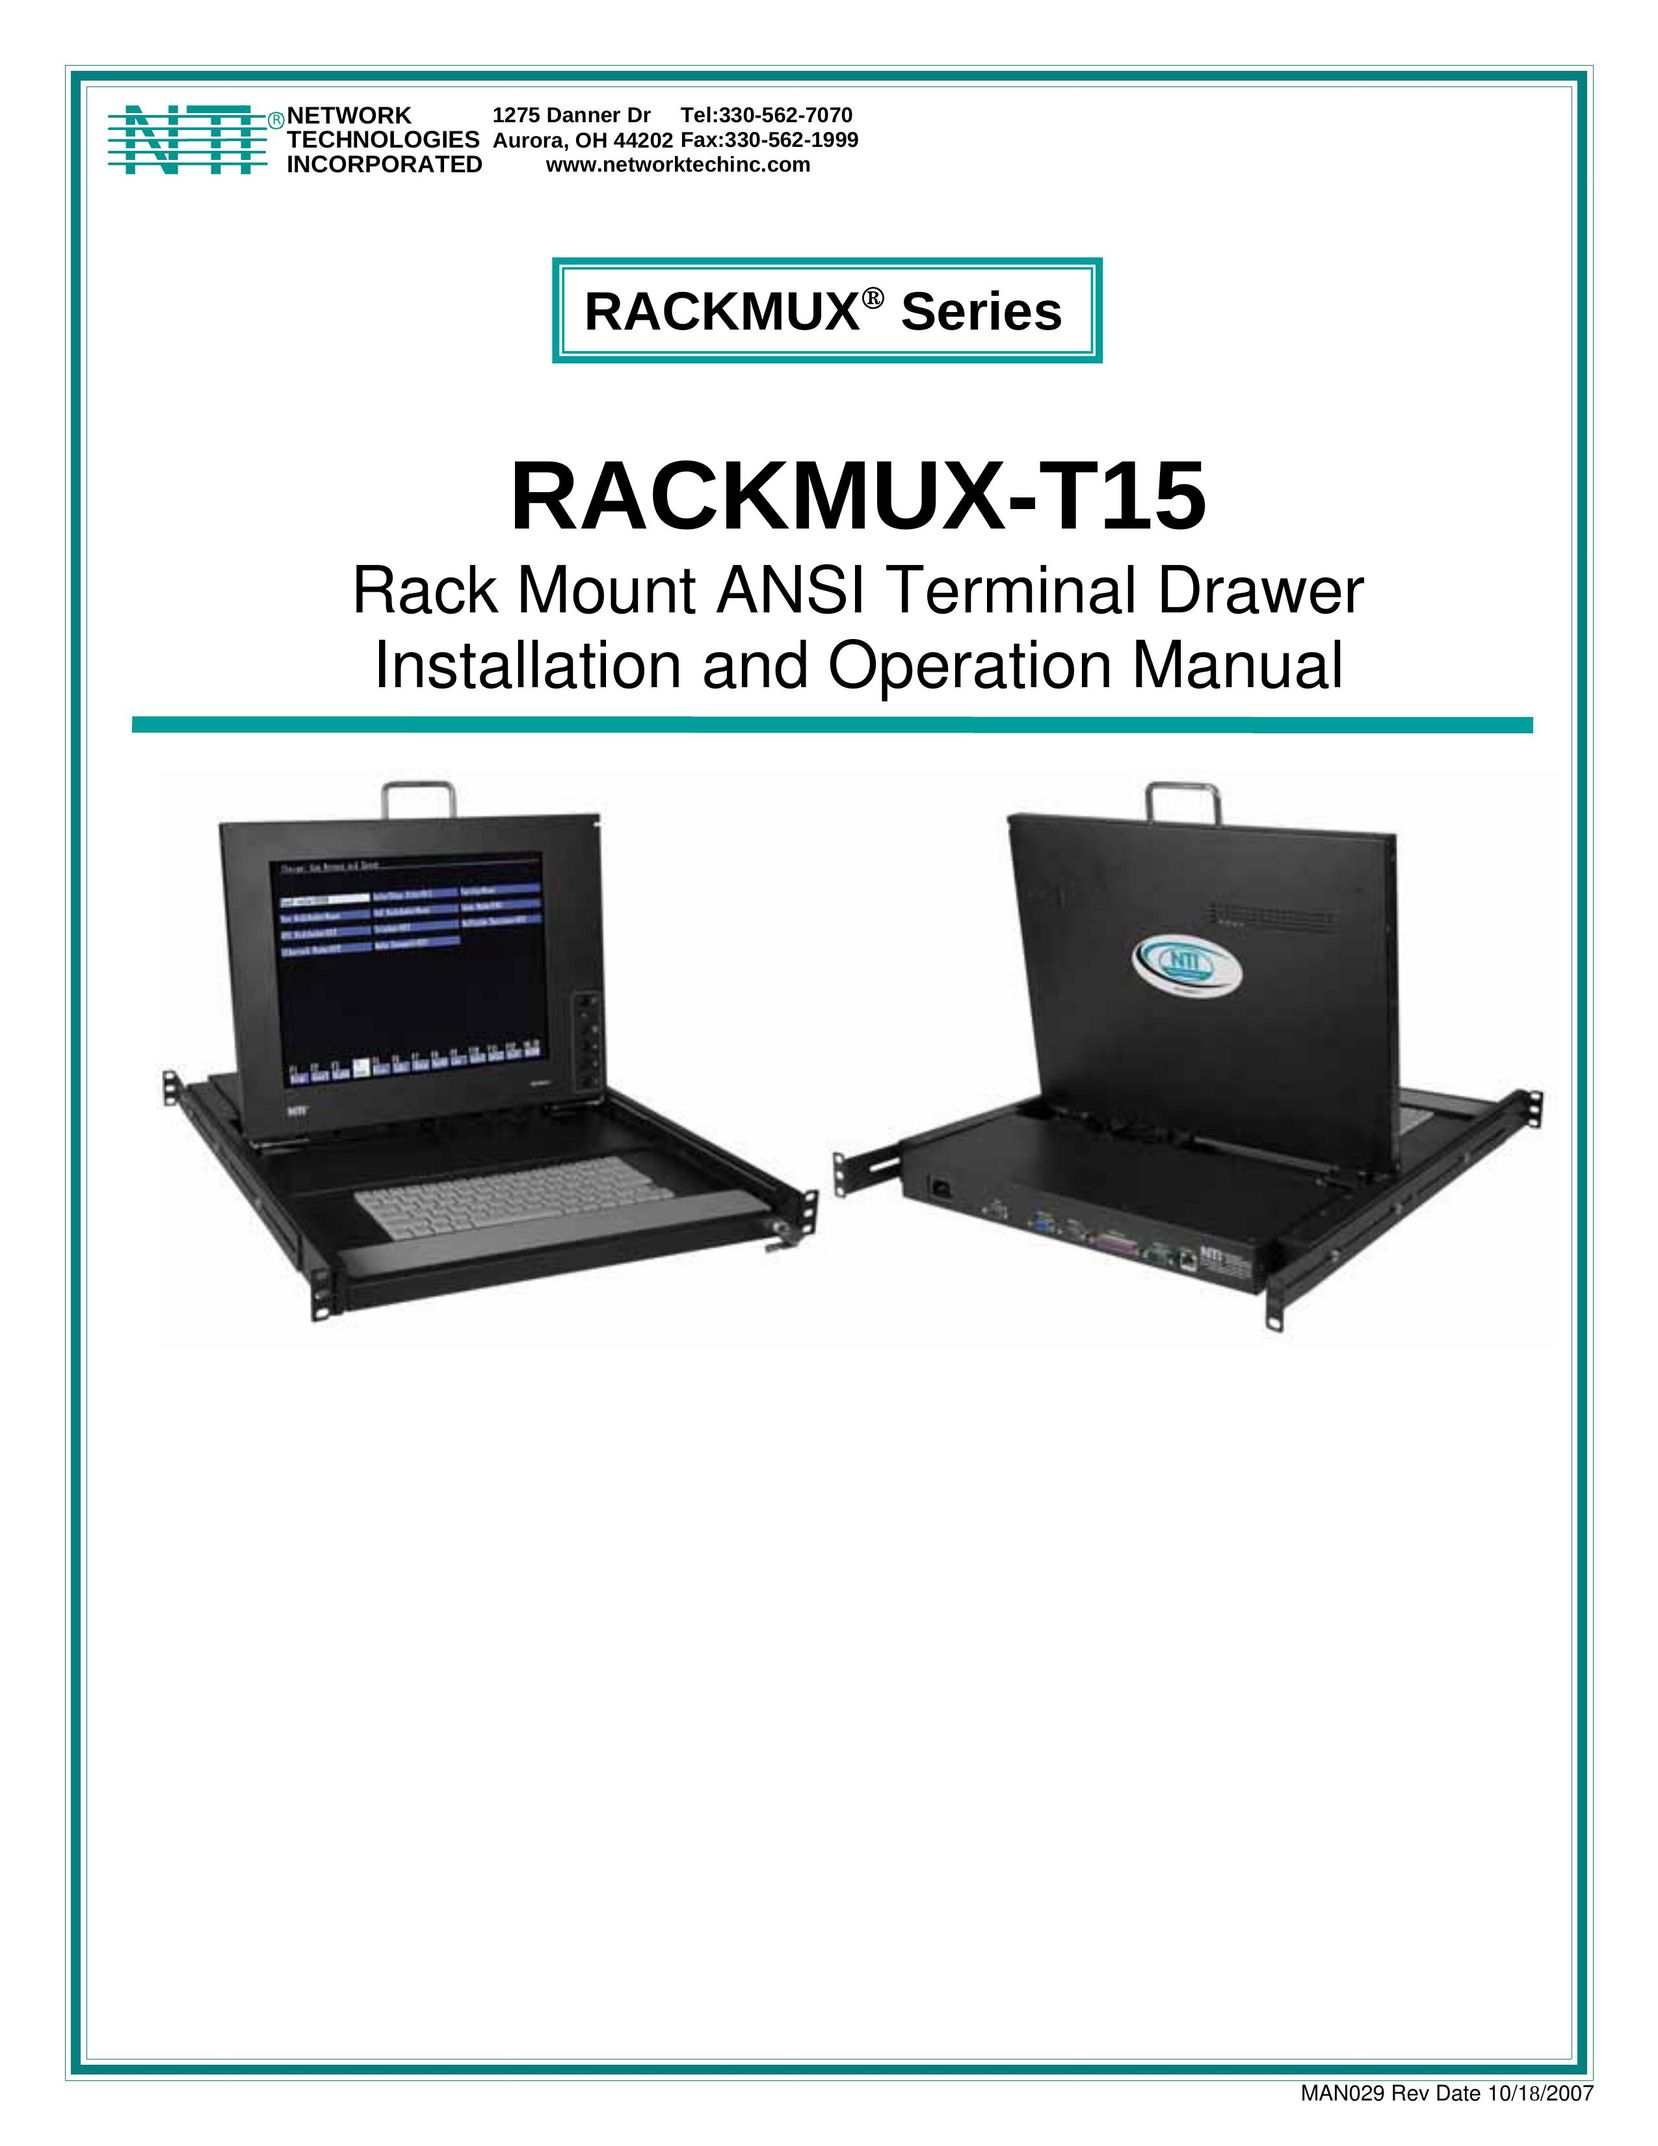 Network Technologies RACKMUX-T15 Carrying Case User Manual